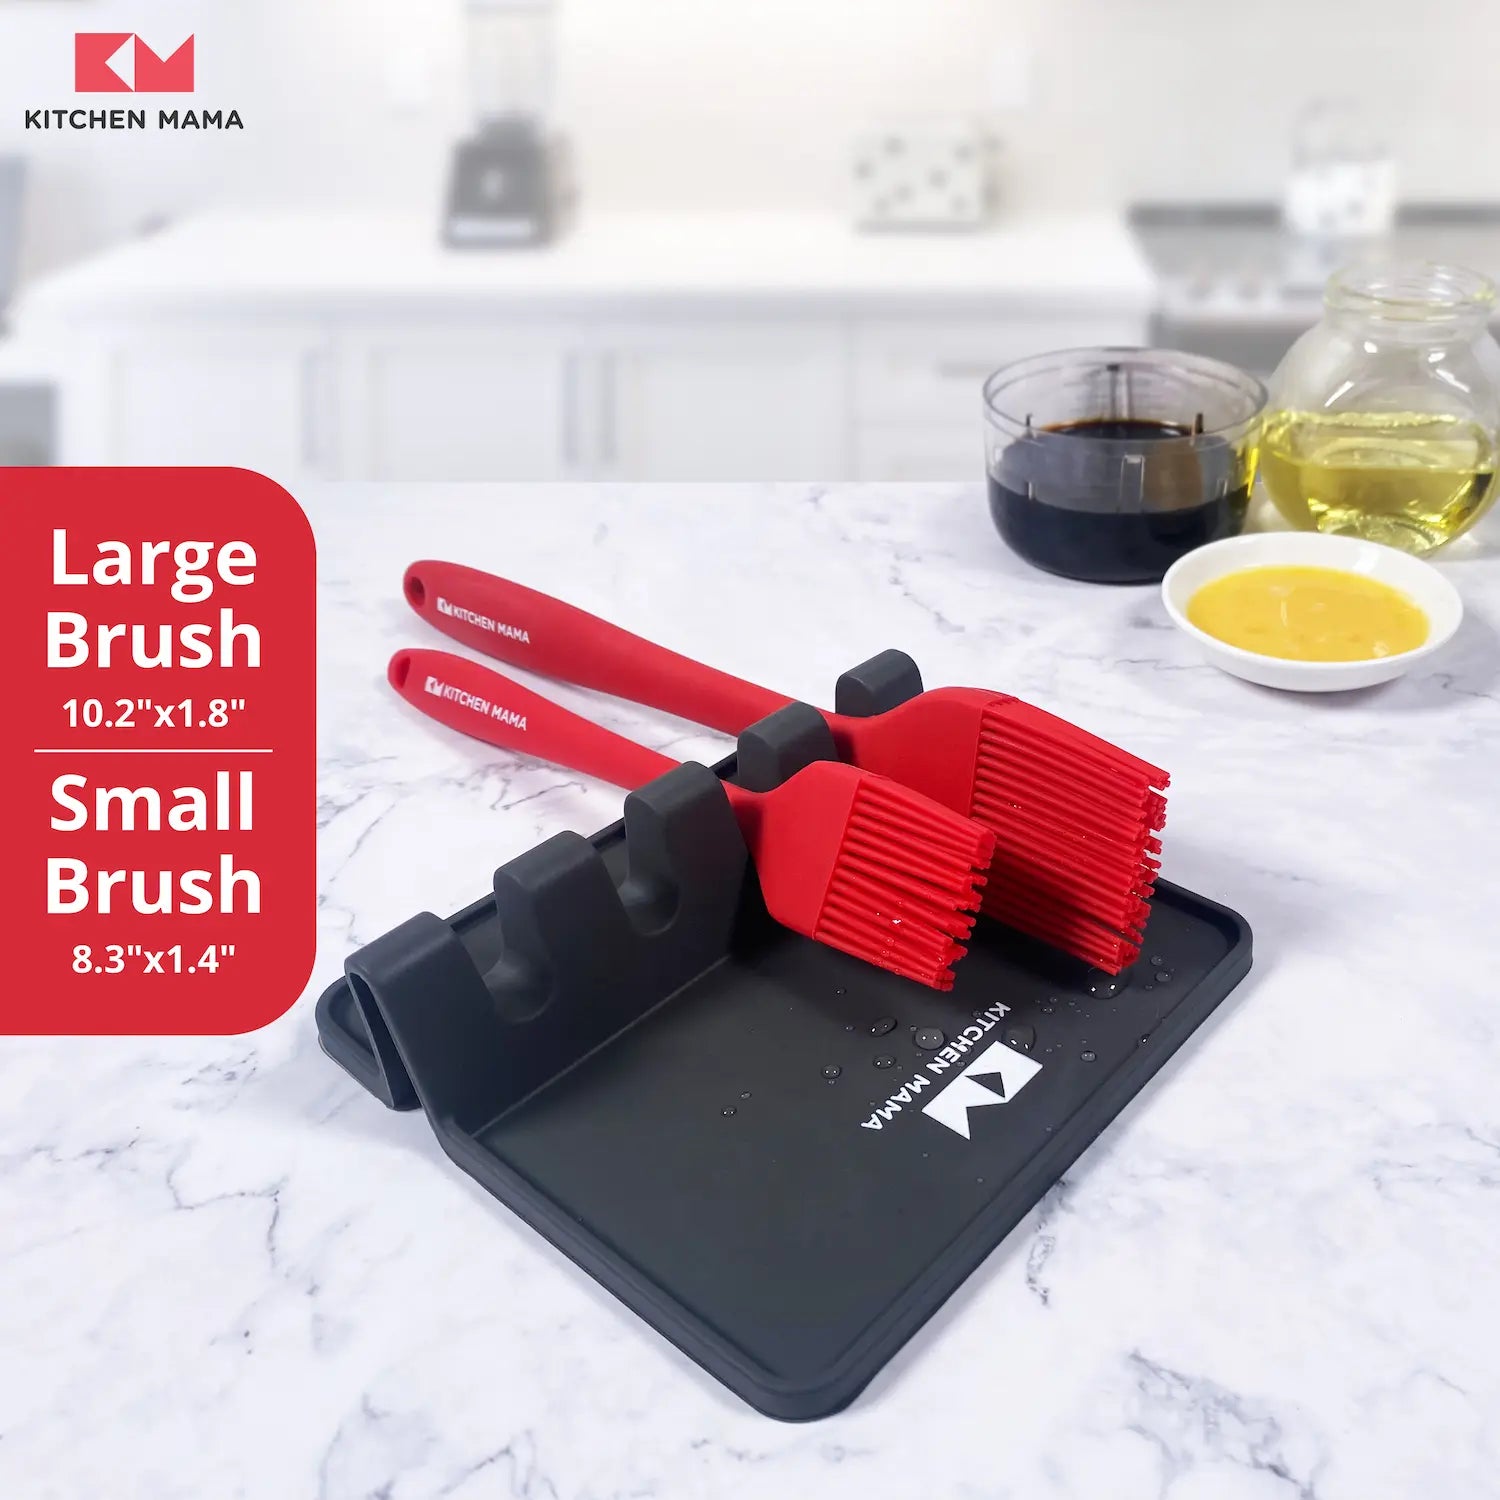 Kitchen Mama Silicone Basting Pastry Brush (A Set of 2), Red, SP0120-R, large & small brush